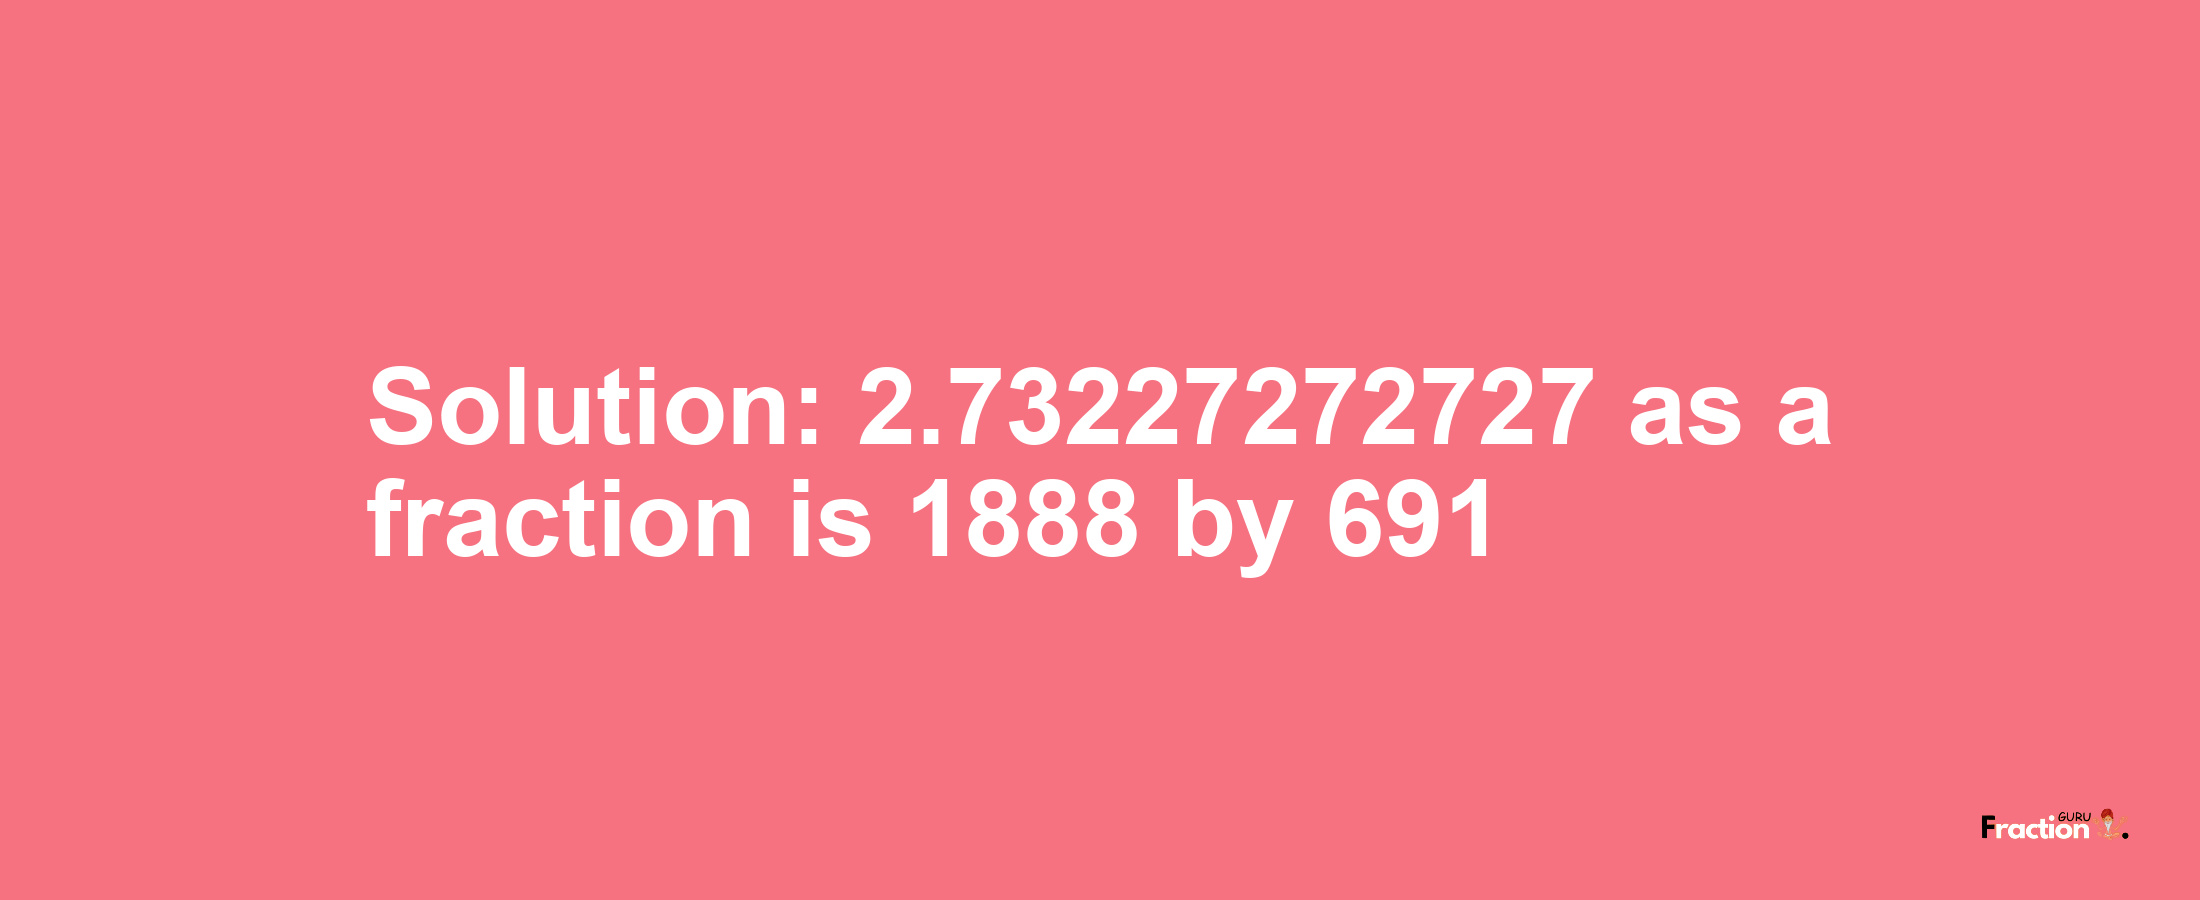 Solution:2.73227272727 as a fraction is 1888/691